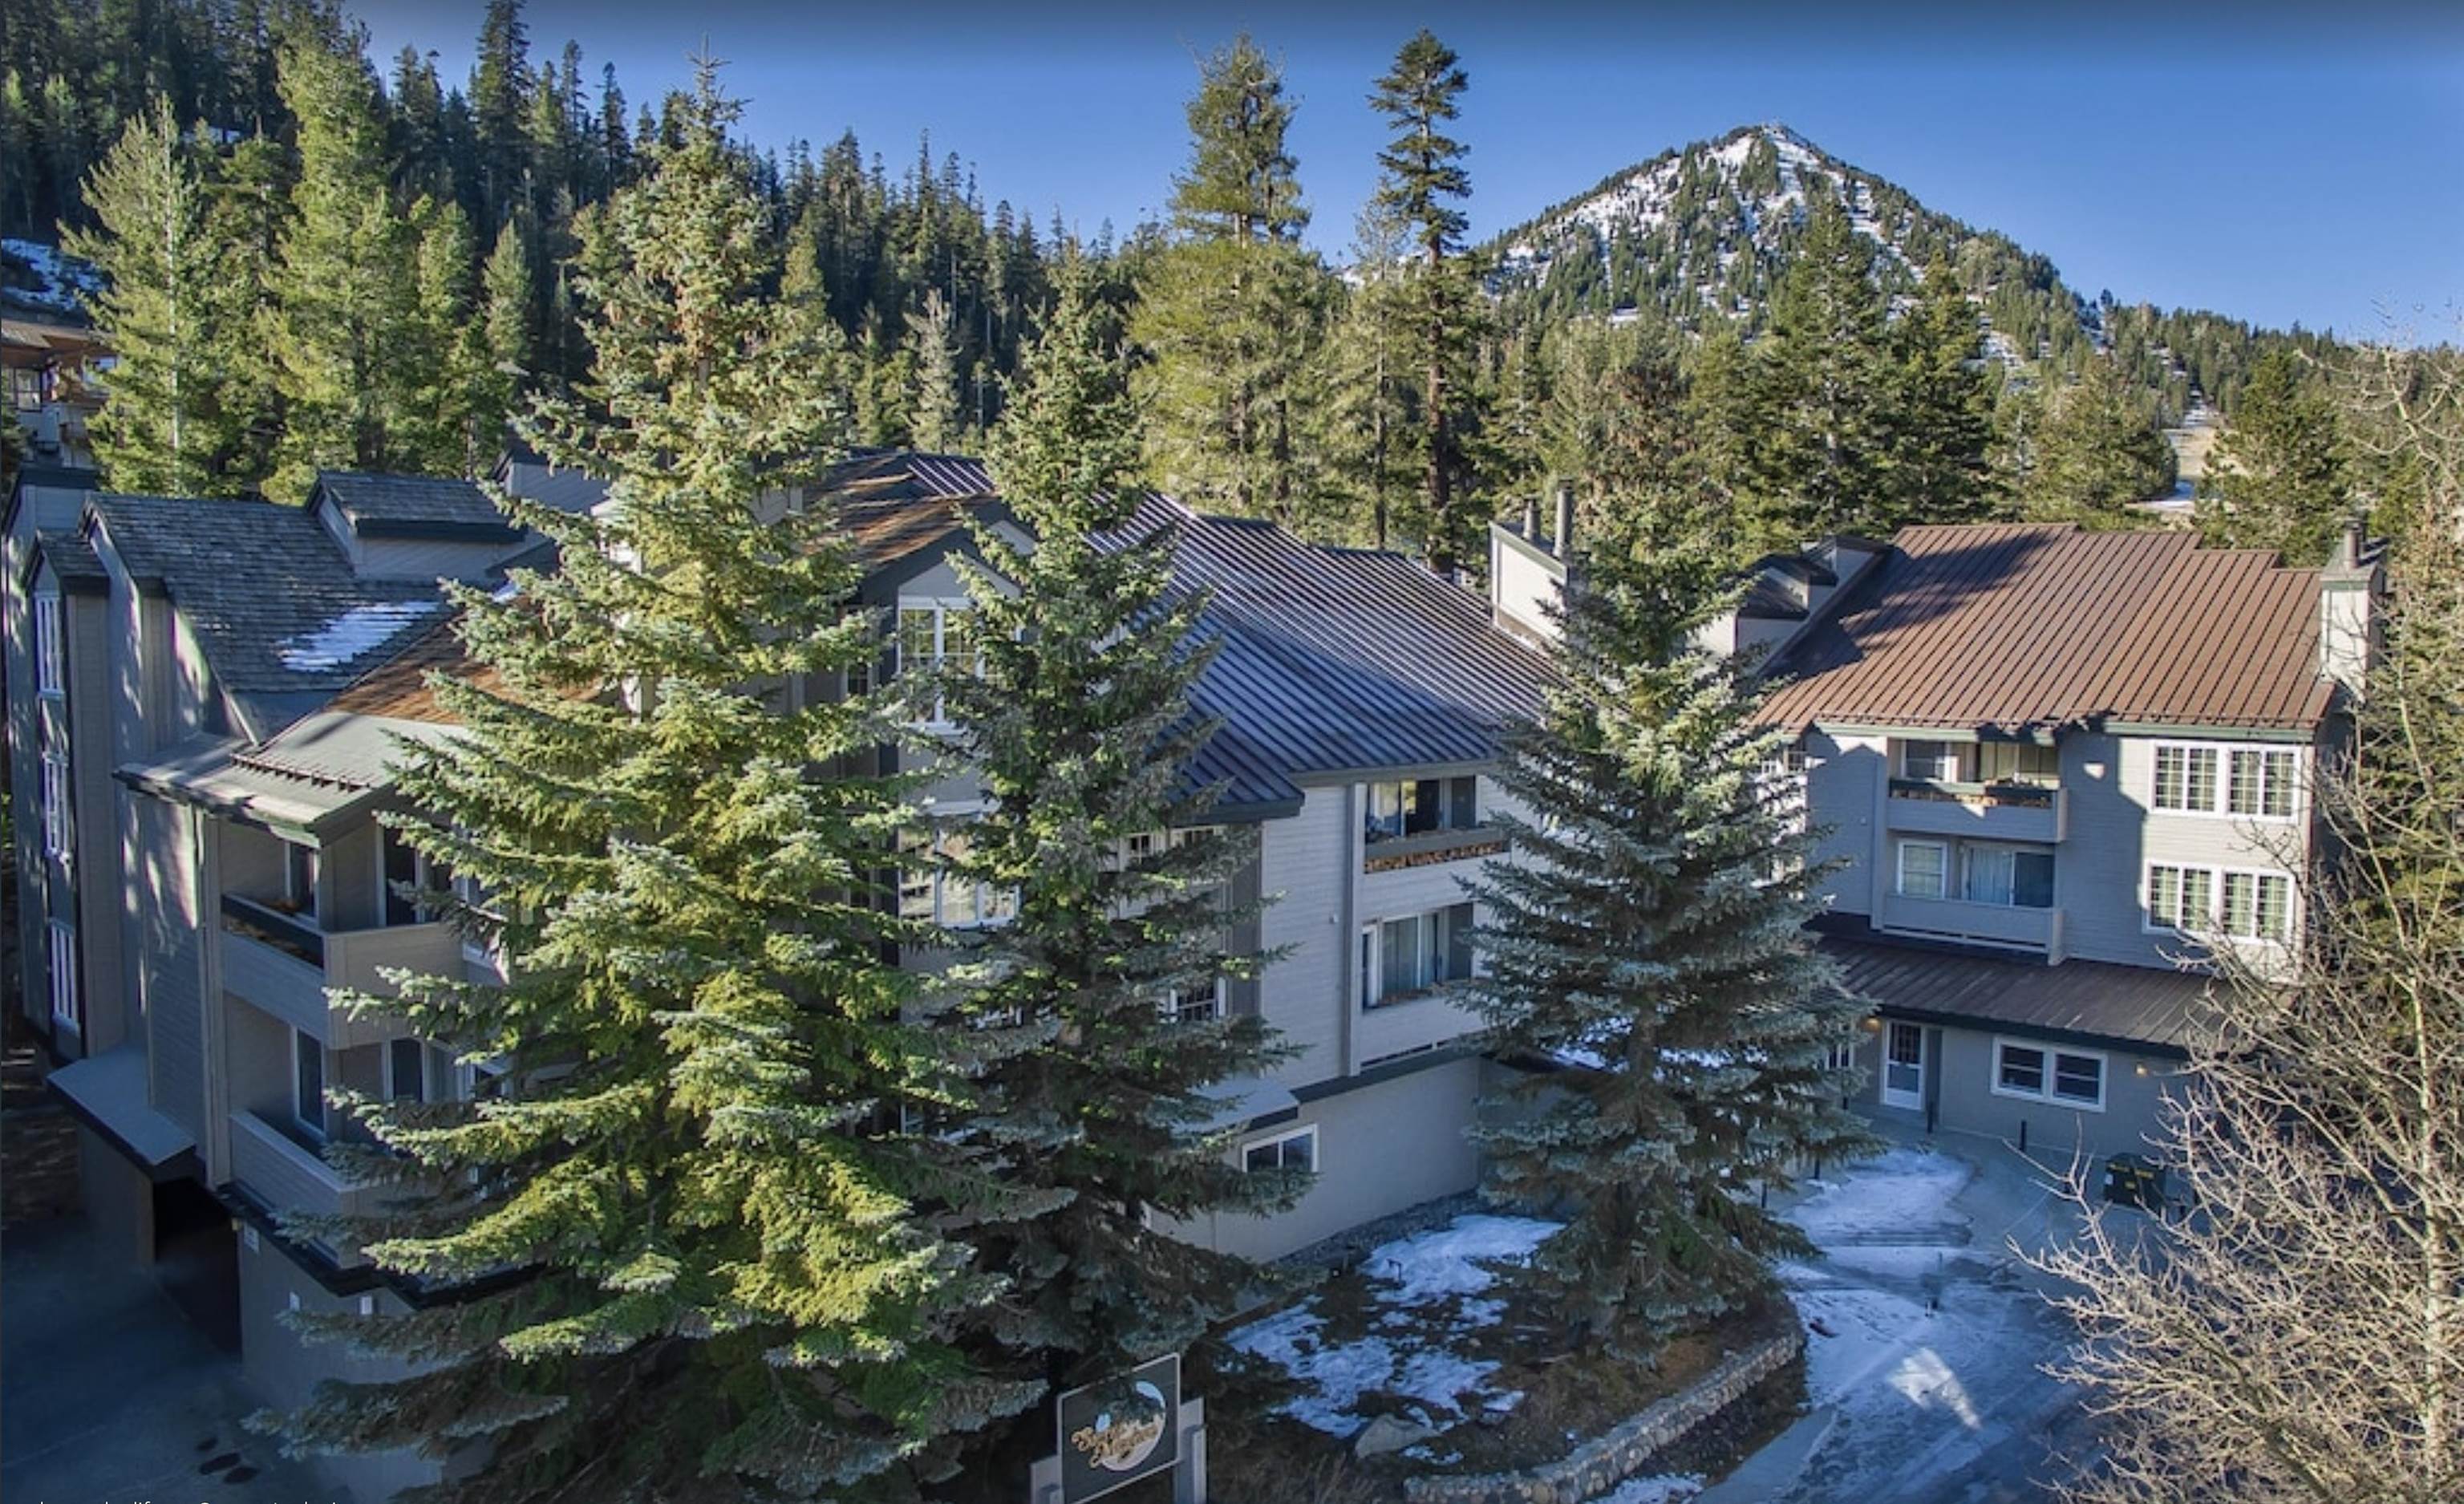 Looking for slope side fun? Convenience, beauty and comfort are yours in this gorgeous, remodeled end-unit condo in Sierra Megeve.  This 1232 sq ft one level condo has 2 spacious bedrooms + bunk alcove, 2 bath and large open living, kitchen, dining area.  This complex is located directly across from Canyon Lodge and is as close to ski-in / ski-out as you will find in Mammoth Lakes – access all Mammoth Mountain has to offer right outside your front door!  From the minute you enter this spacious and open floor plan you are ready to relax.  Right off the stone floor mudroom entry is a guest bedroom, bunk nook and bath.  Step inside the living area and you will find an updated kitchen featuring poured in place concrete countertops with metal trim and custom cabinets.  The large dining room is centered with an art quality light fixture and provides access to the covered balcony. The stone encased wood stove is the focal point of the mountain modern living room with huge sectional couch perfect for relaxing after a day of adventures.  Just off the living room is a large primary suite with dual sink vanity and deep soaking tub and shower.  The living areas and bedrooms feature genuine hardwood floors.  Did we mention storage?  In addition to multiple closets inside the condo, there is a storage closet just outside the front door for convenient ski and board storage.  This condo is move-in ready and is being sold furnished (less artwork).  Enjoy all Sierra Megeve has to offer including underground covered parking, swimming pool, hot tub, sauna and common area laundry.  Besides location, Sierra Megeve is known to be a very quiet and peaceful complex.  The free winter blue line shuttle bus stops right in front and will take you to The Village or to downtown. HOA includes internet, snow removal, exterior and common area building maintenance.